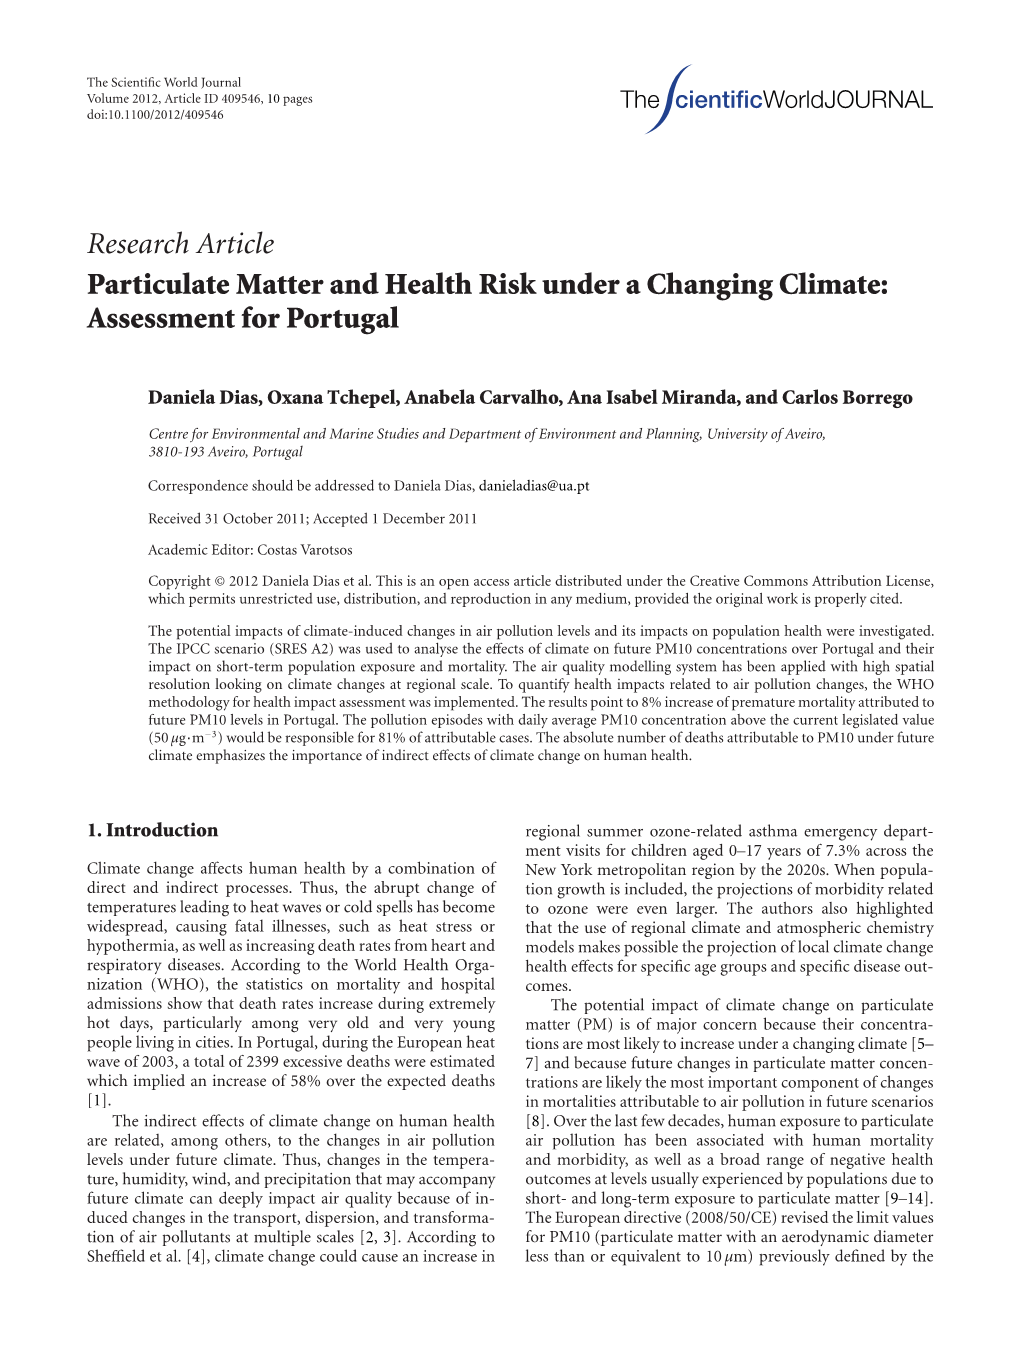 Research Article Particulate Matter and Health Risk Under a Changing Climate: Assessment for Portugal